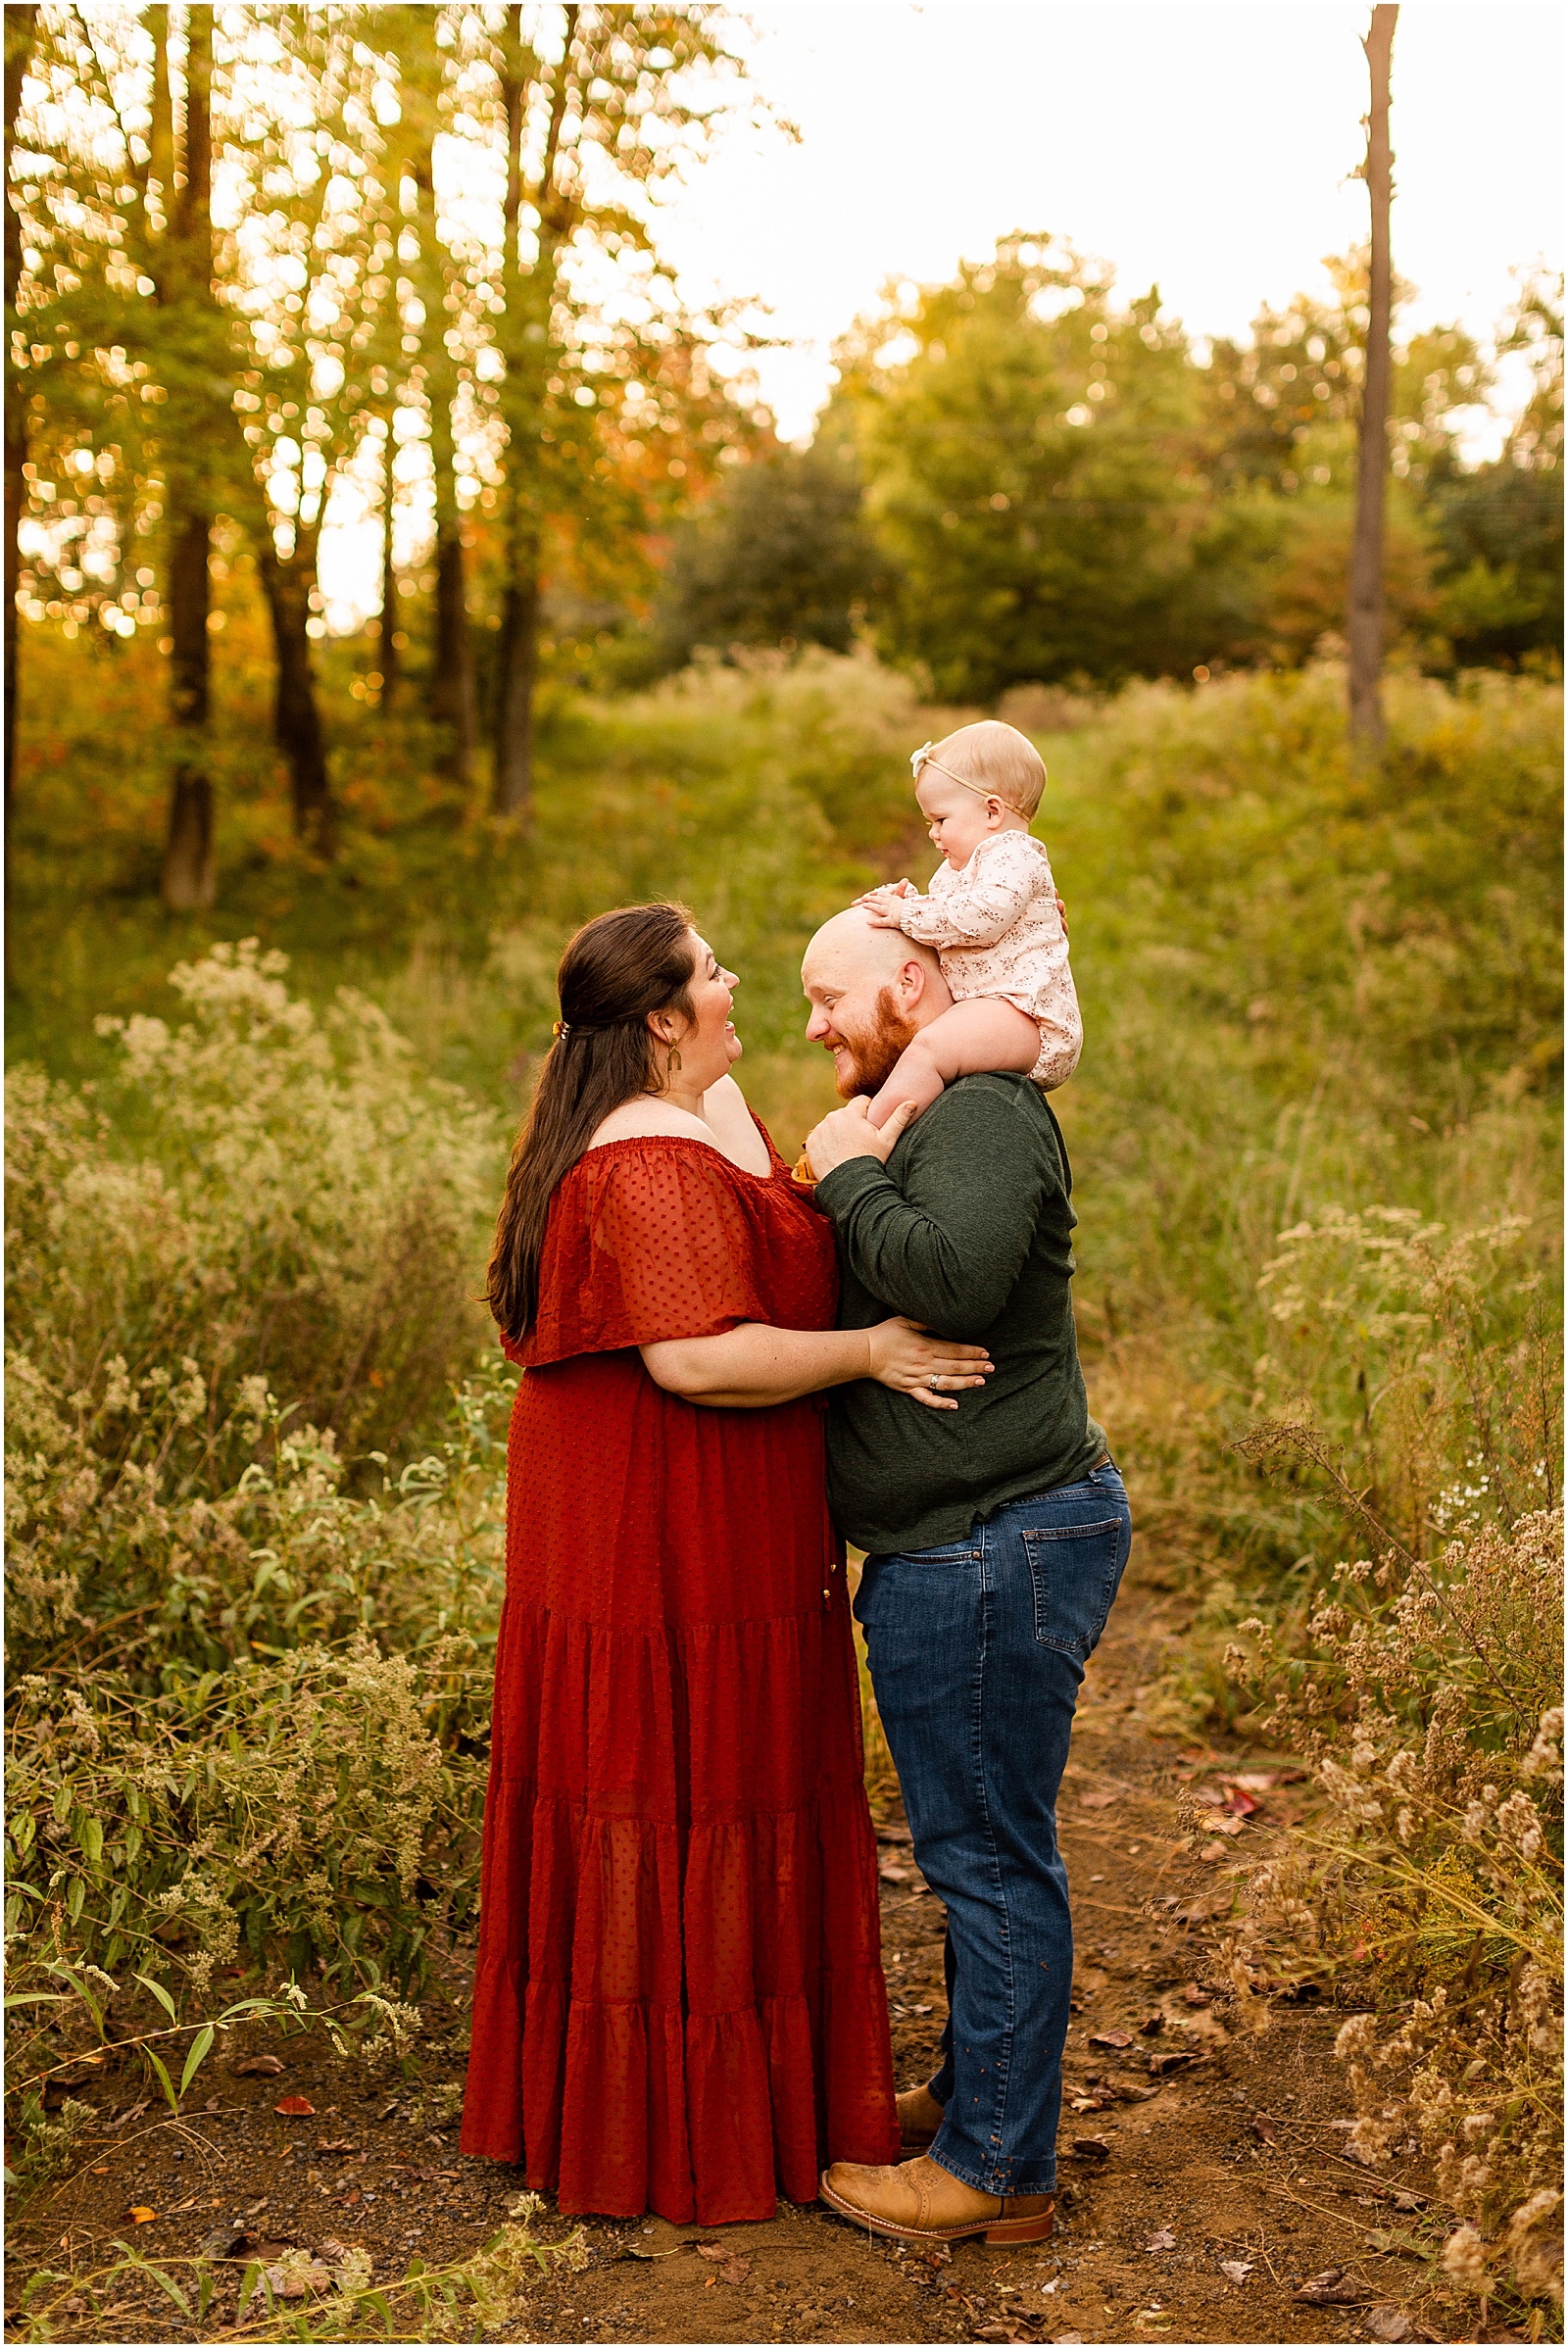 The Peck's Fall Family Session Bret and Brandie Photography | Evansville Indiana Wedding Photographers_0042.jpg